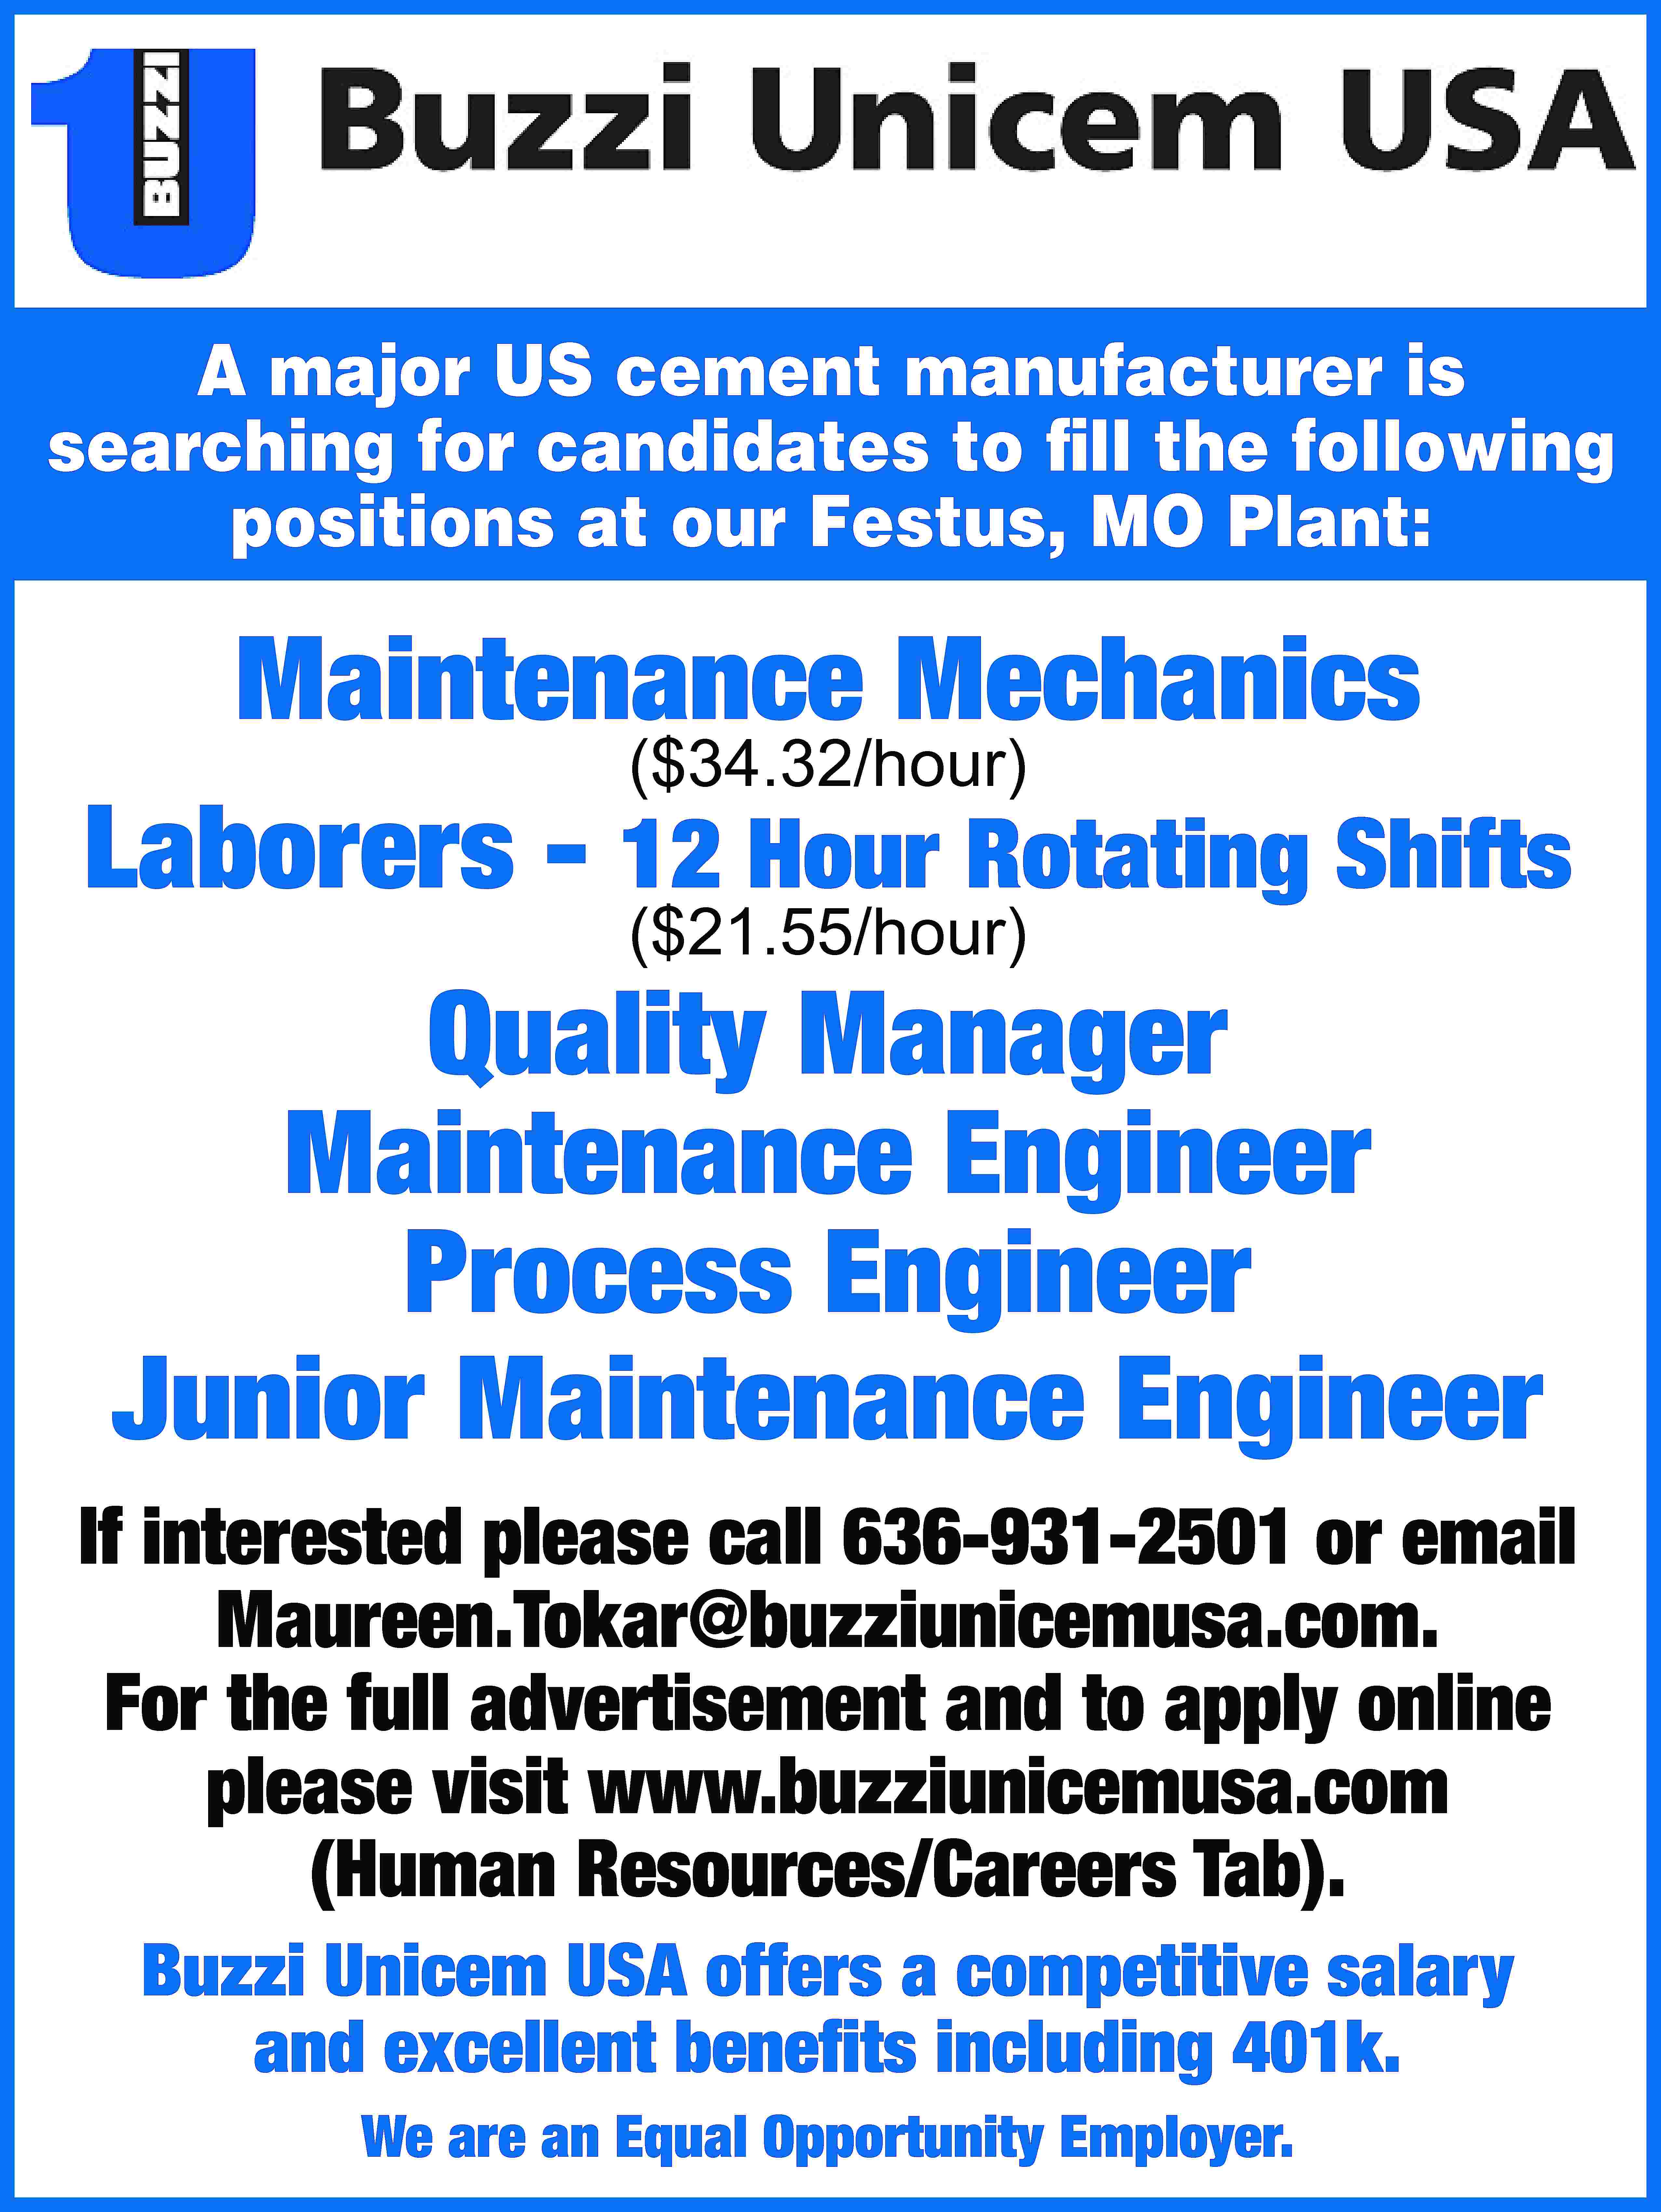 A major US cement manufacturer  A major US cement manufacturer is searching for candidates to fill the following positions at our Festus, MO Plant: Maintenance Mechanics ($34.32/hour) Laborers - 12 Hour Rotating Shifts ($21.55/hour) Quality Manager Maintenance Engineer Process Engineer Junior Maintenance Engineer If interested please call 636-931-2501 or email Maureen.Tokar@buzziunicemusa.com. For the full advertisement and to apply online please visit www.buzziunicemusa.com (Human Resources/Careers Tab). Buzzi Unicem USA offers a competitive salary and excellent benefits including 401k. We are an Equal Opportunity Employer.